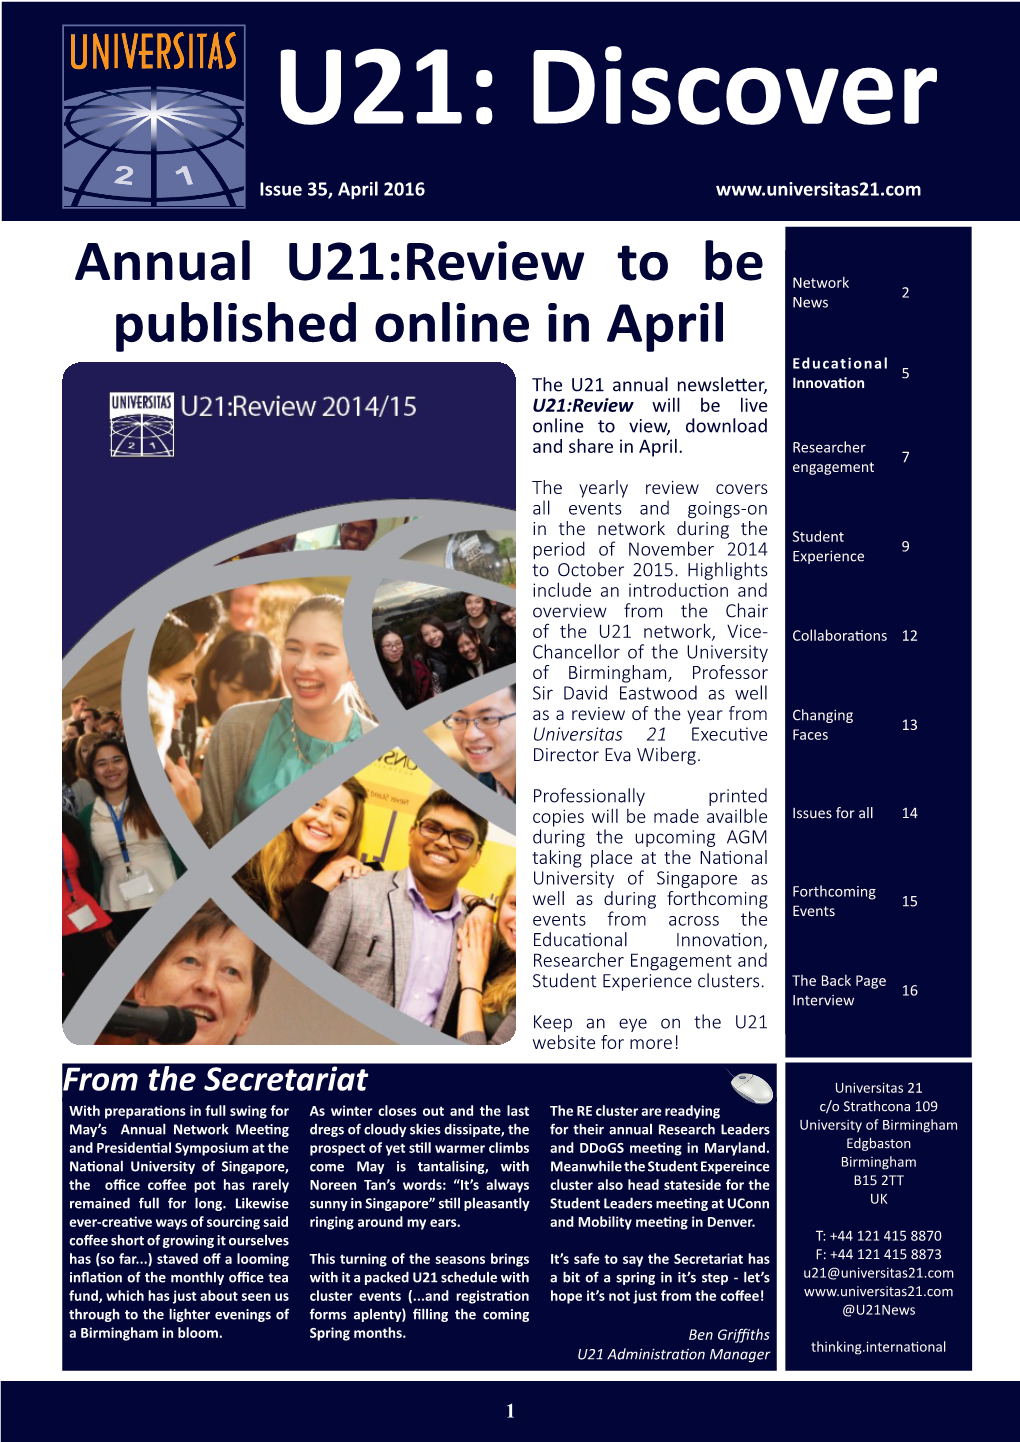 Annual U21:Review to Be Published Online in April